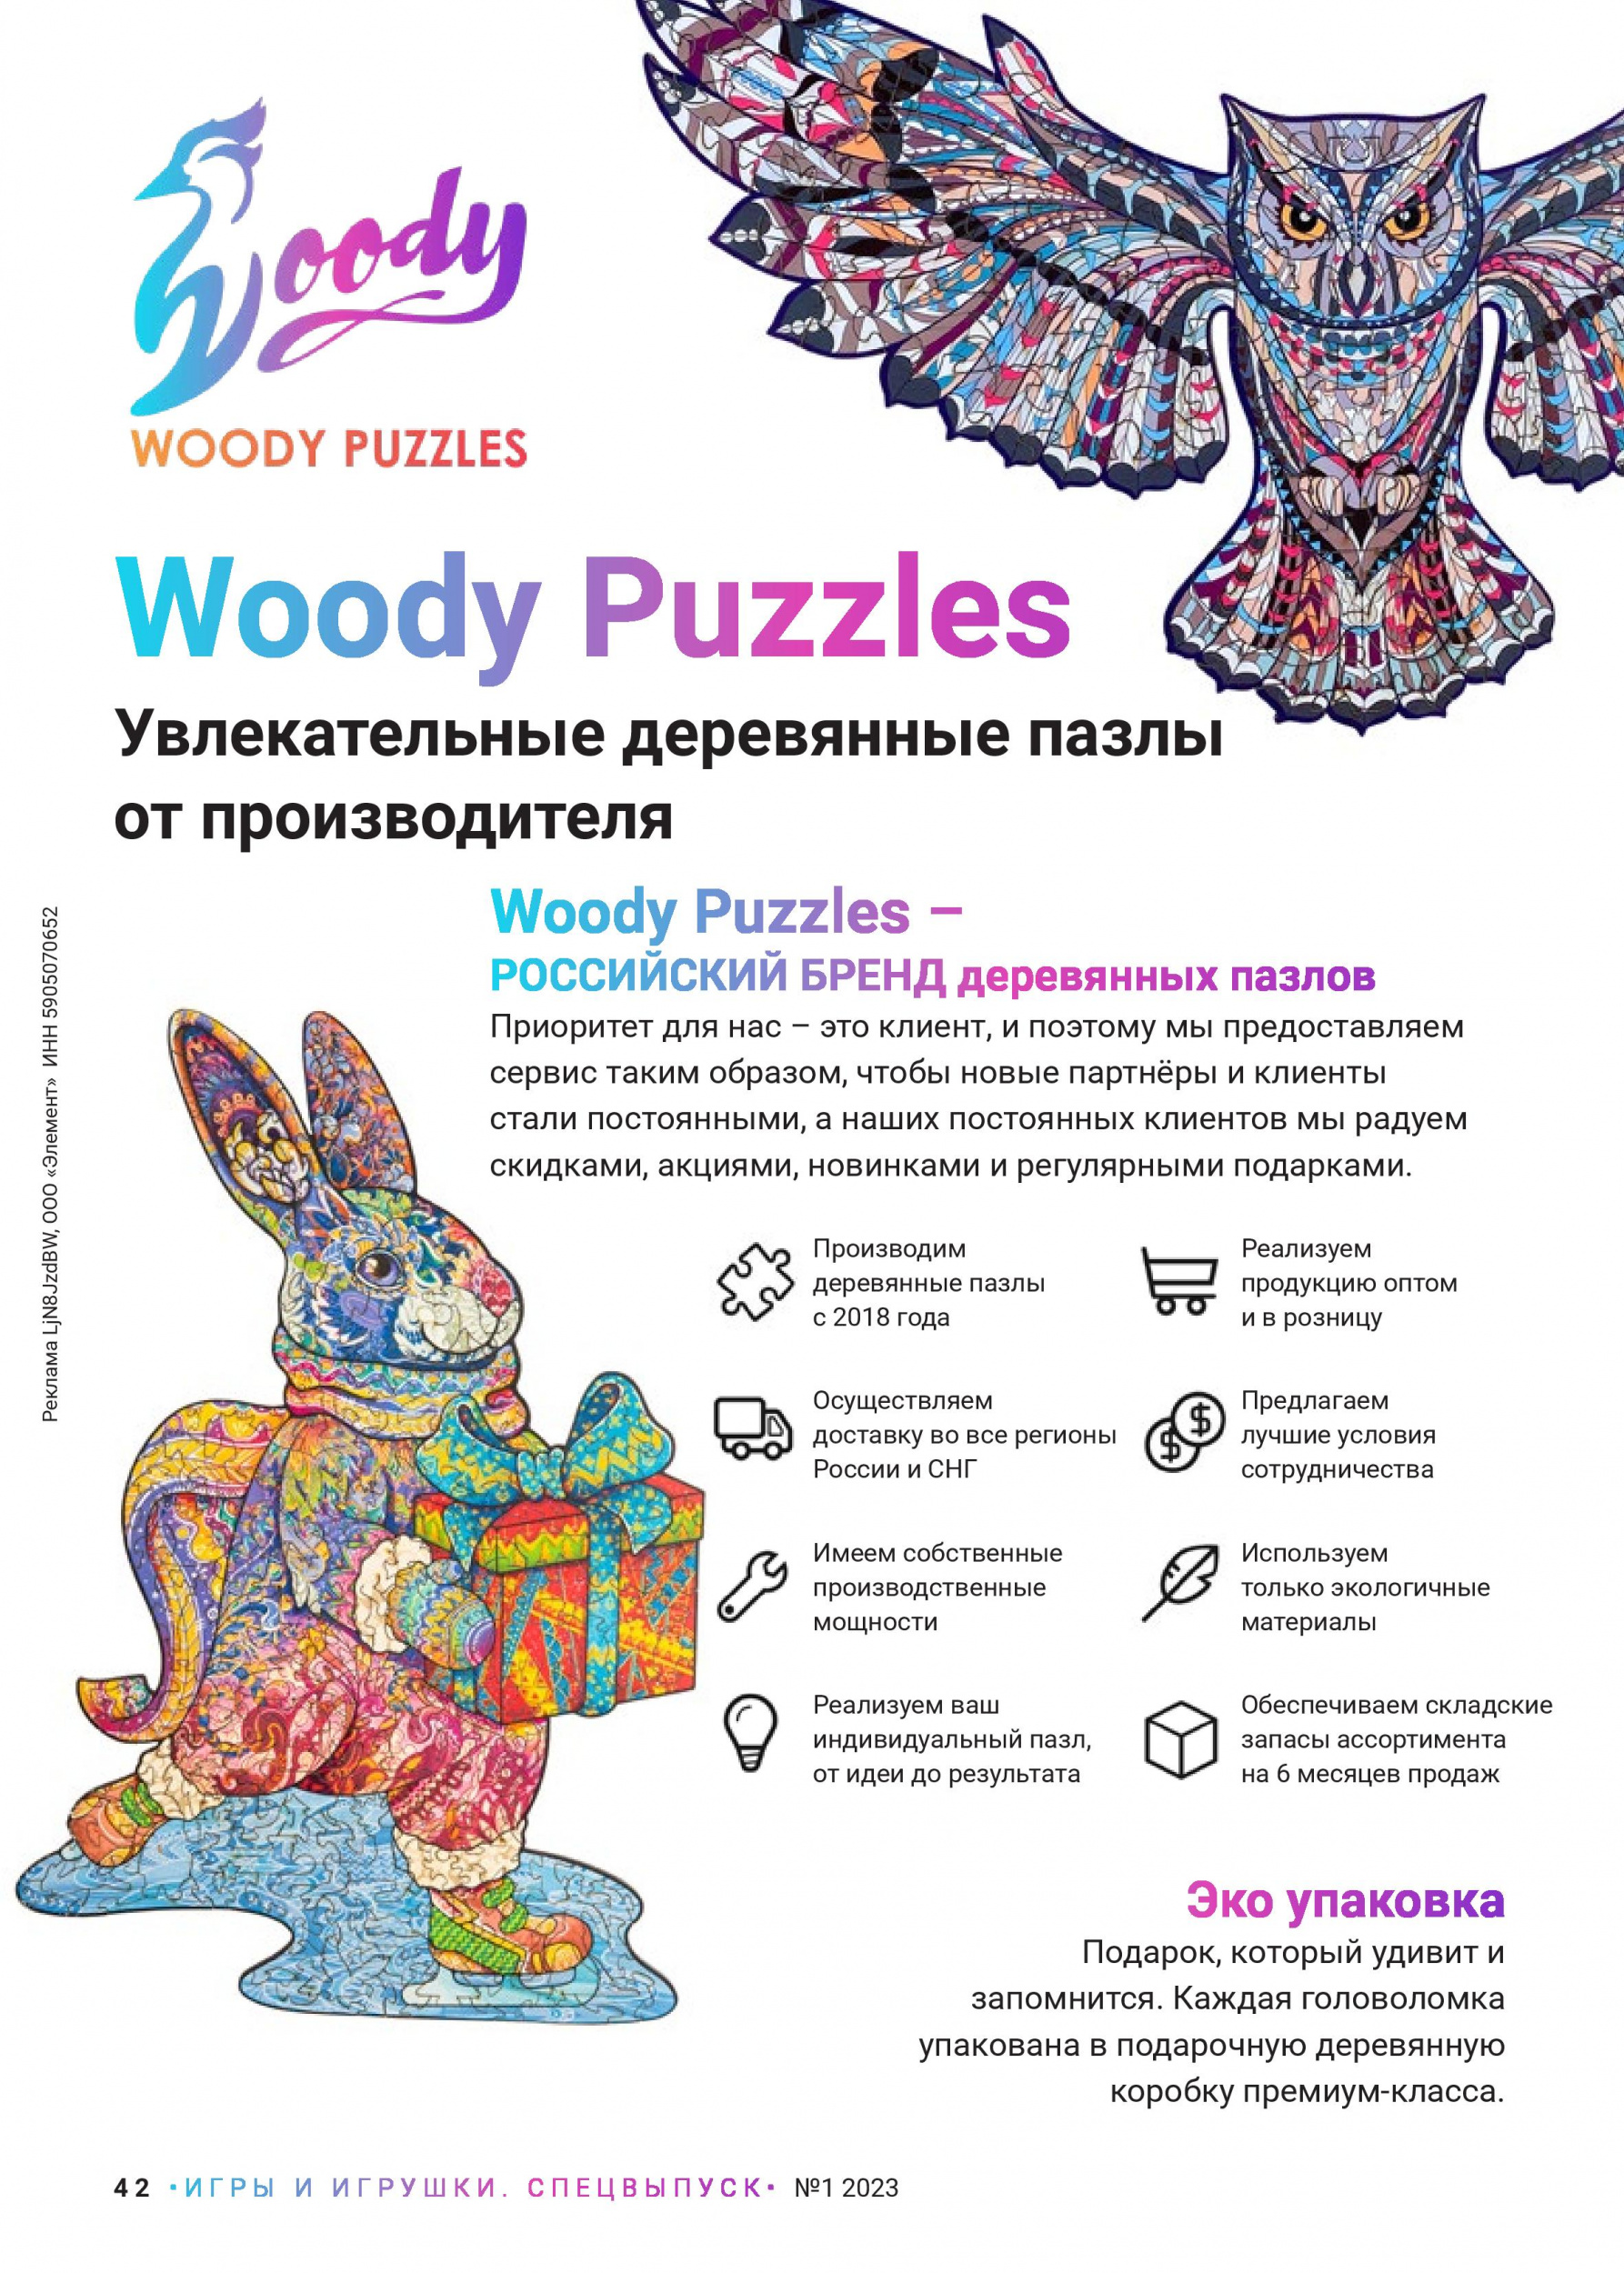 Woody Puzzles